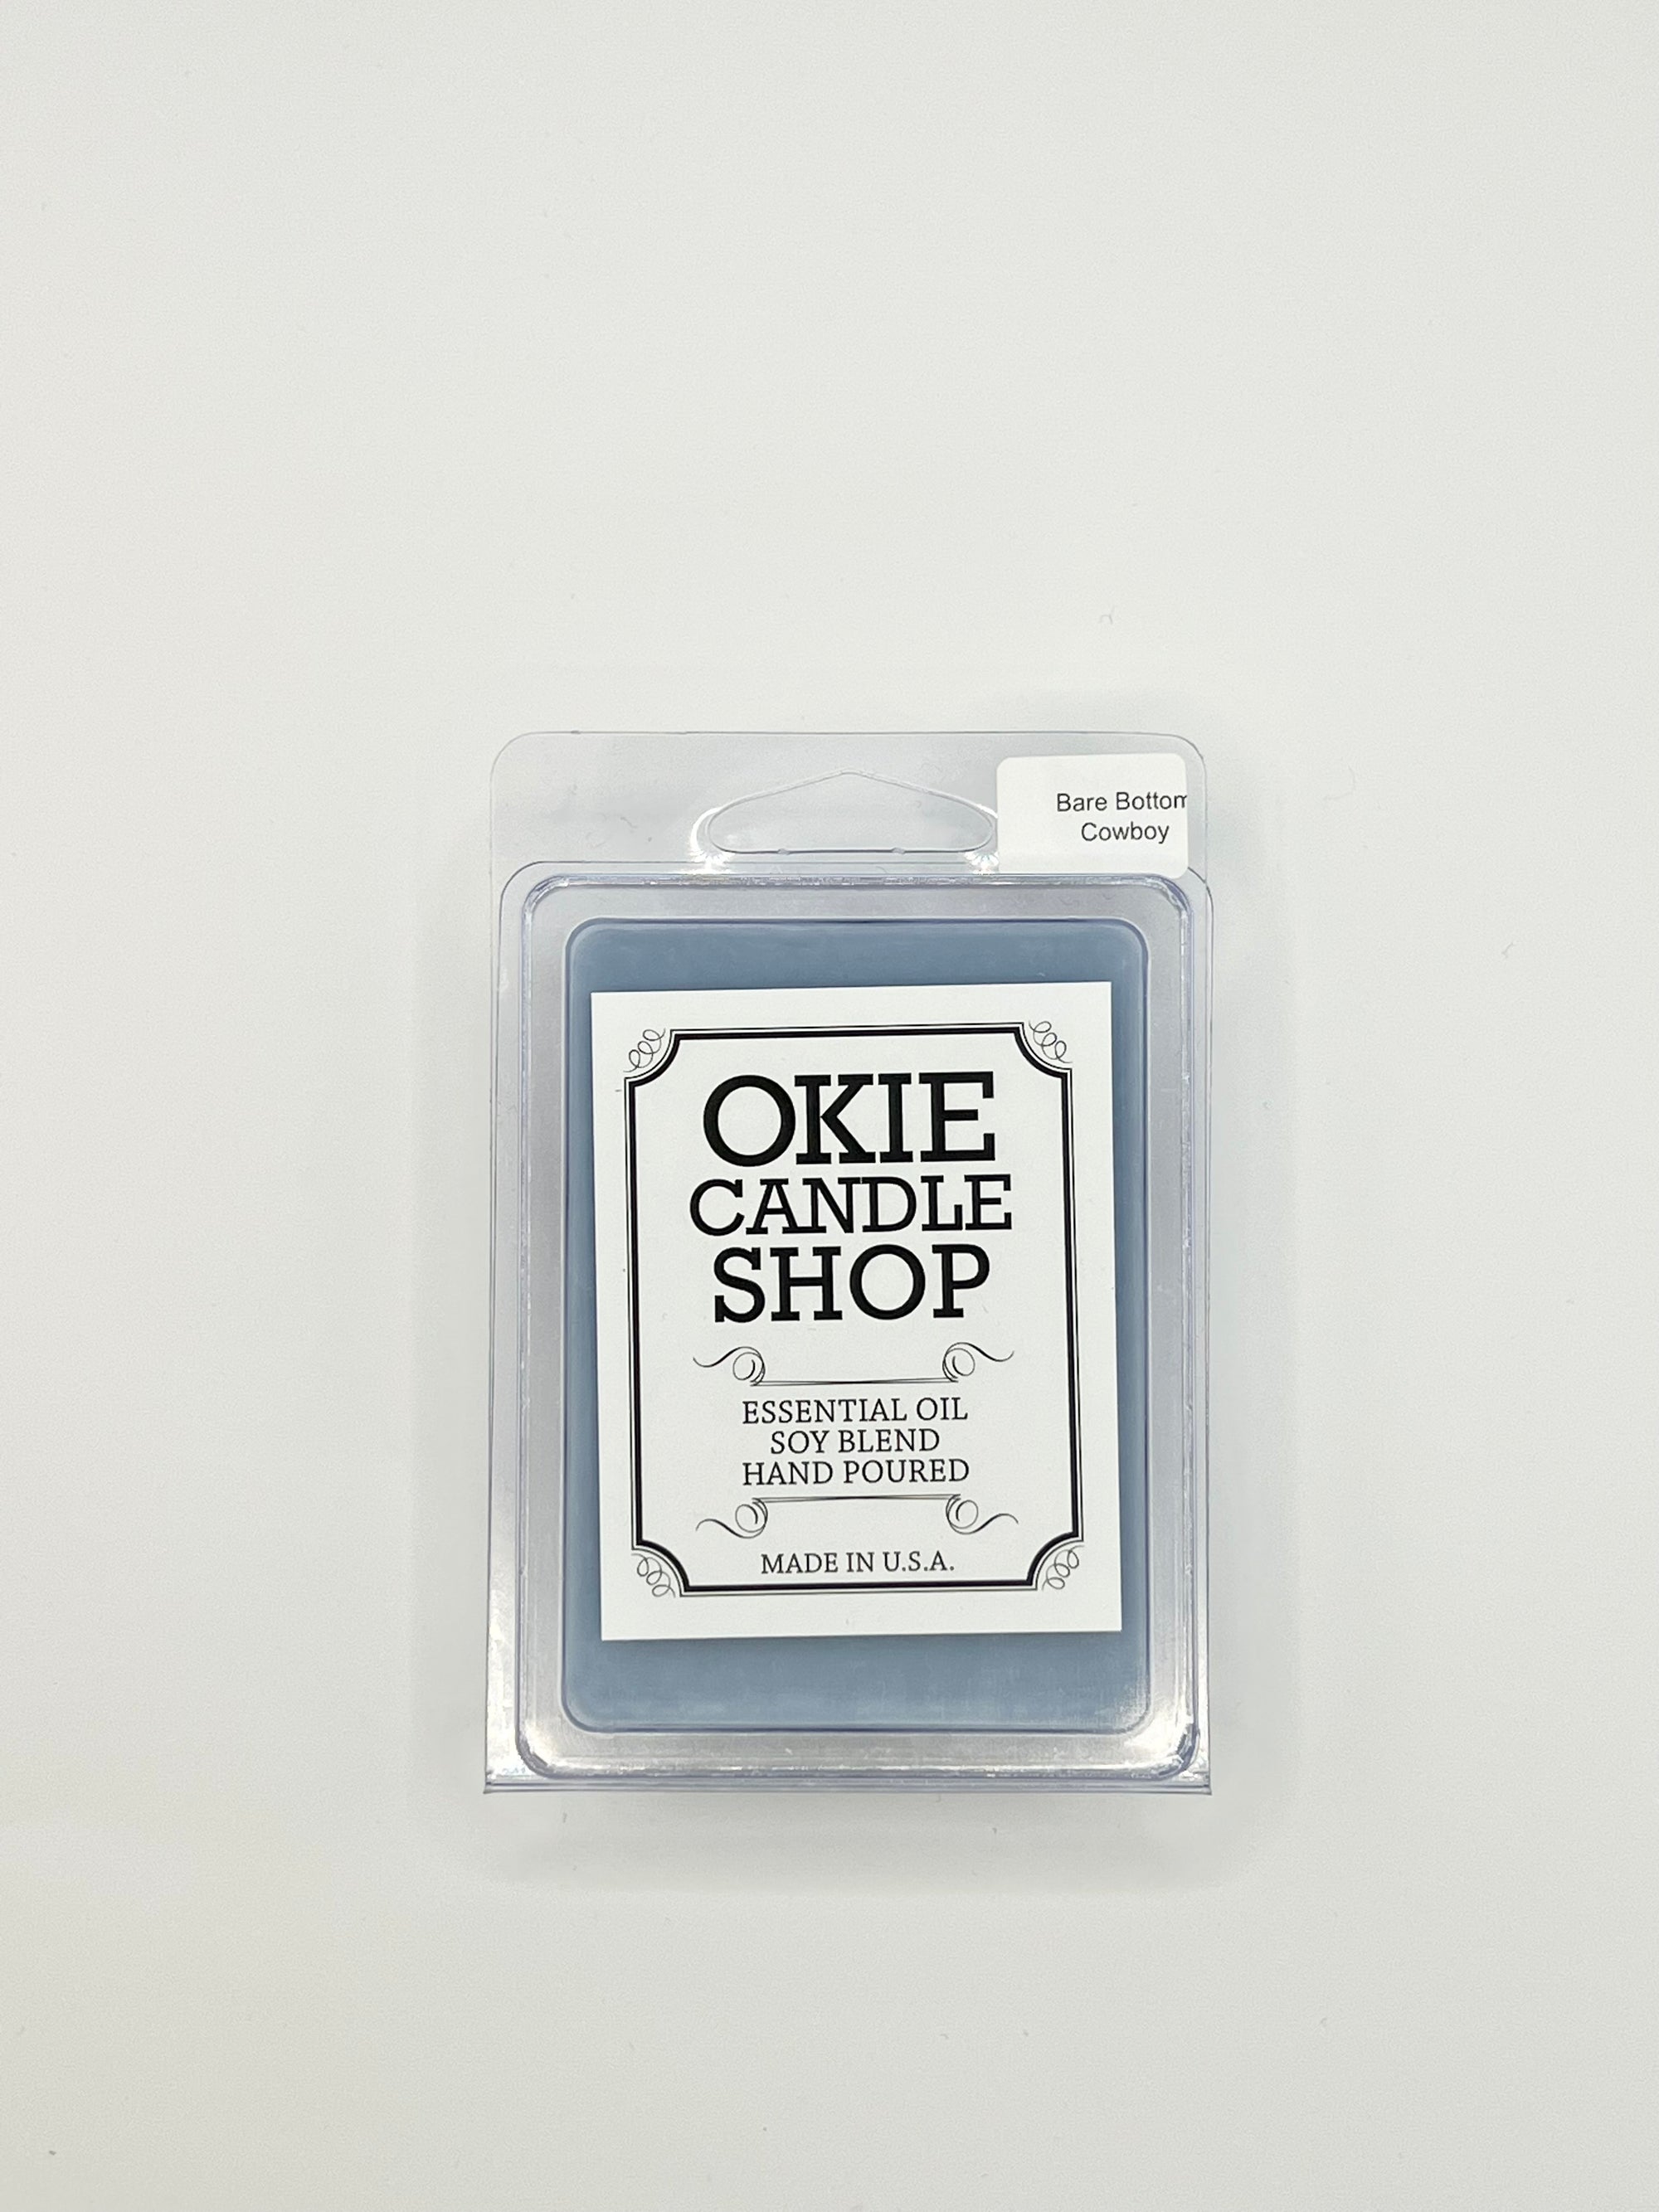 Okie Candle Bare Bottom Cowboy - Wax Melts